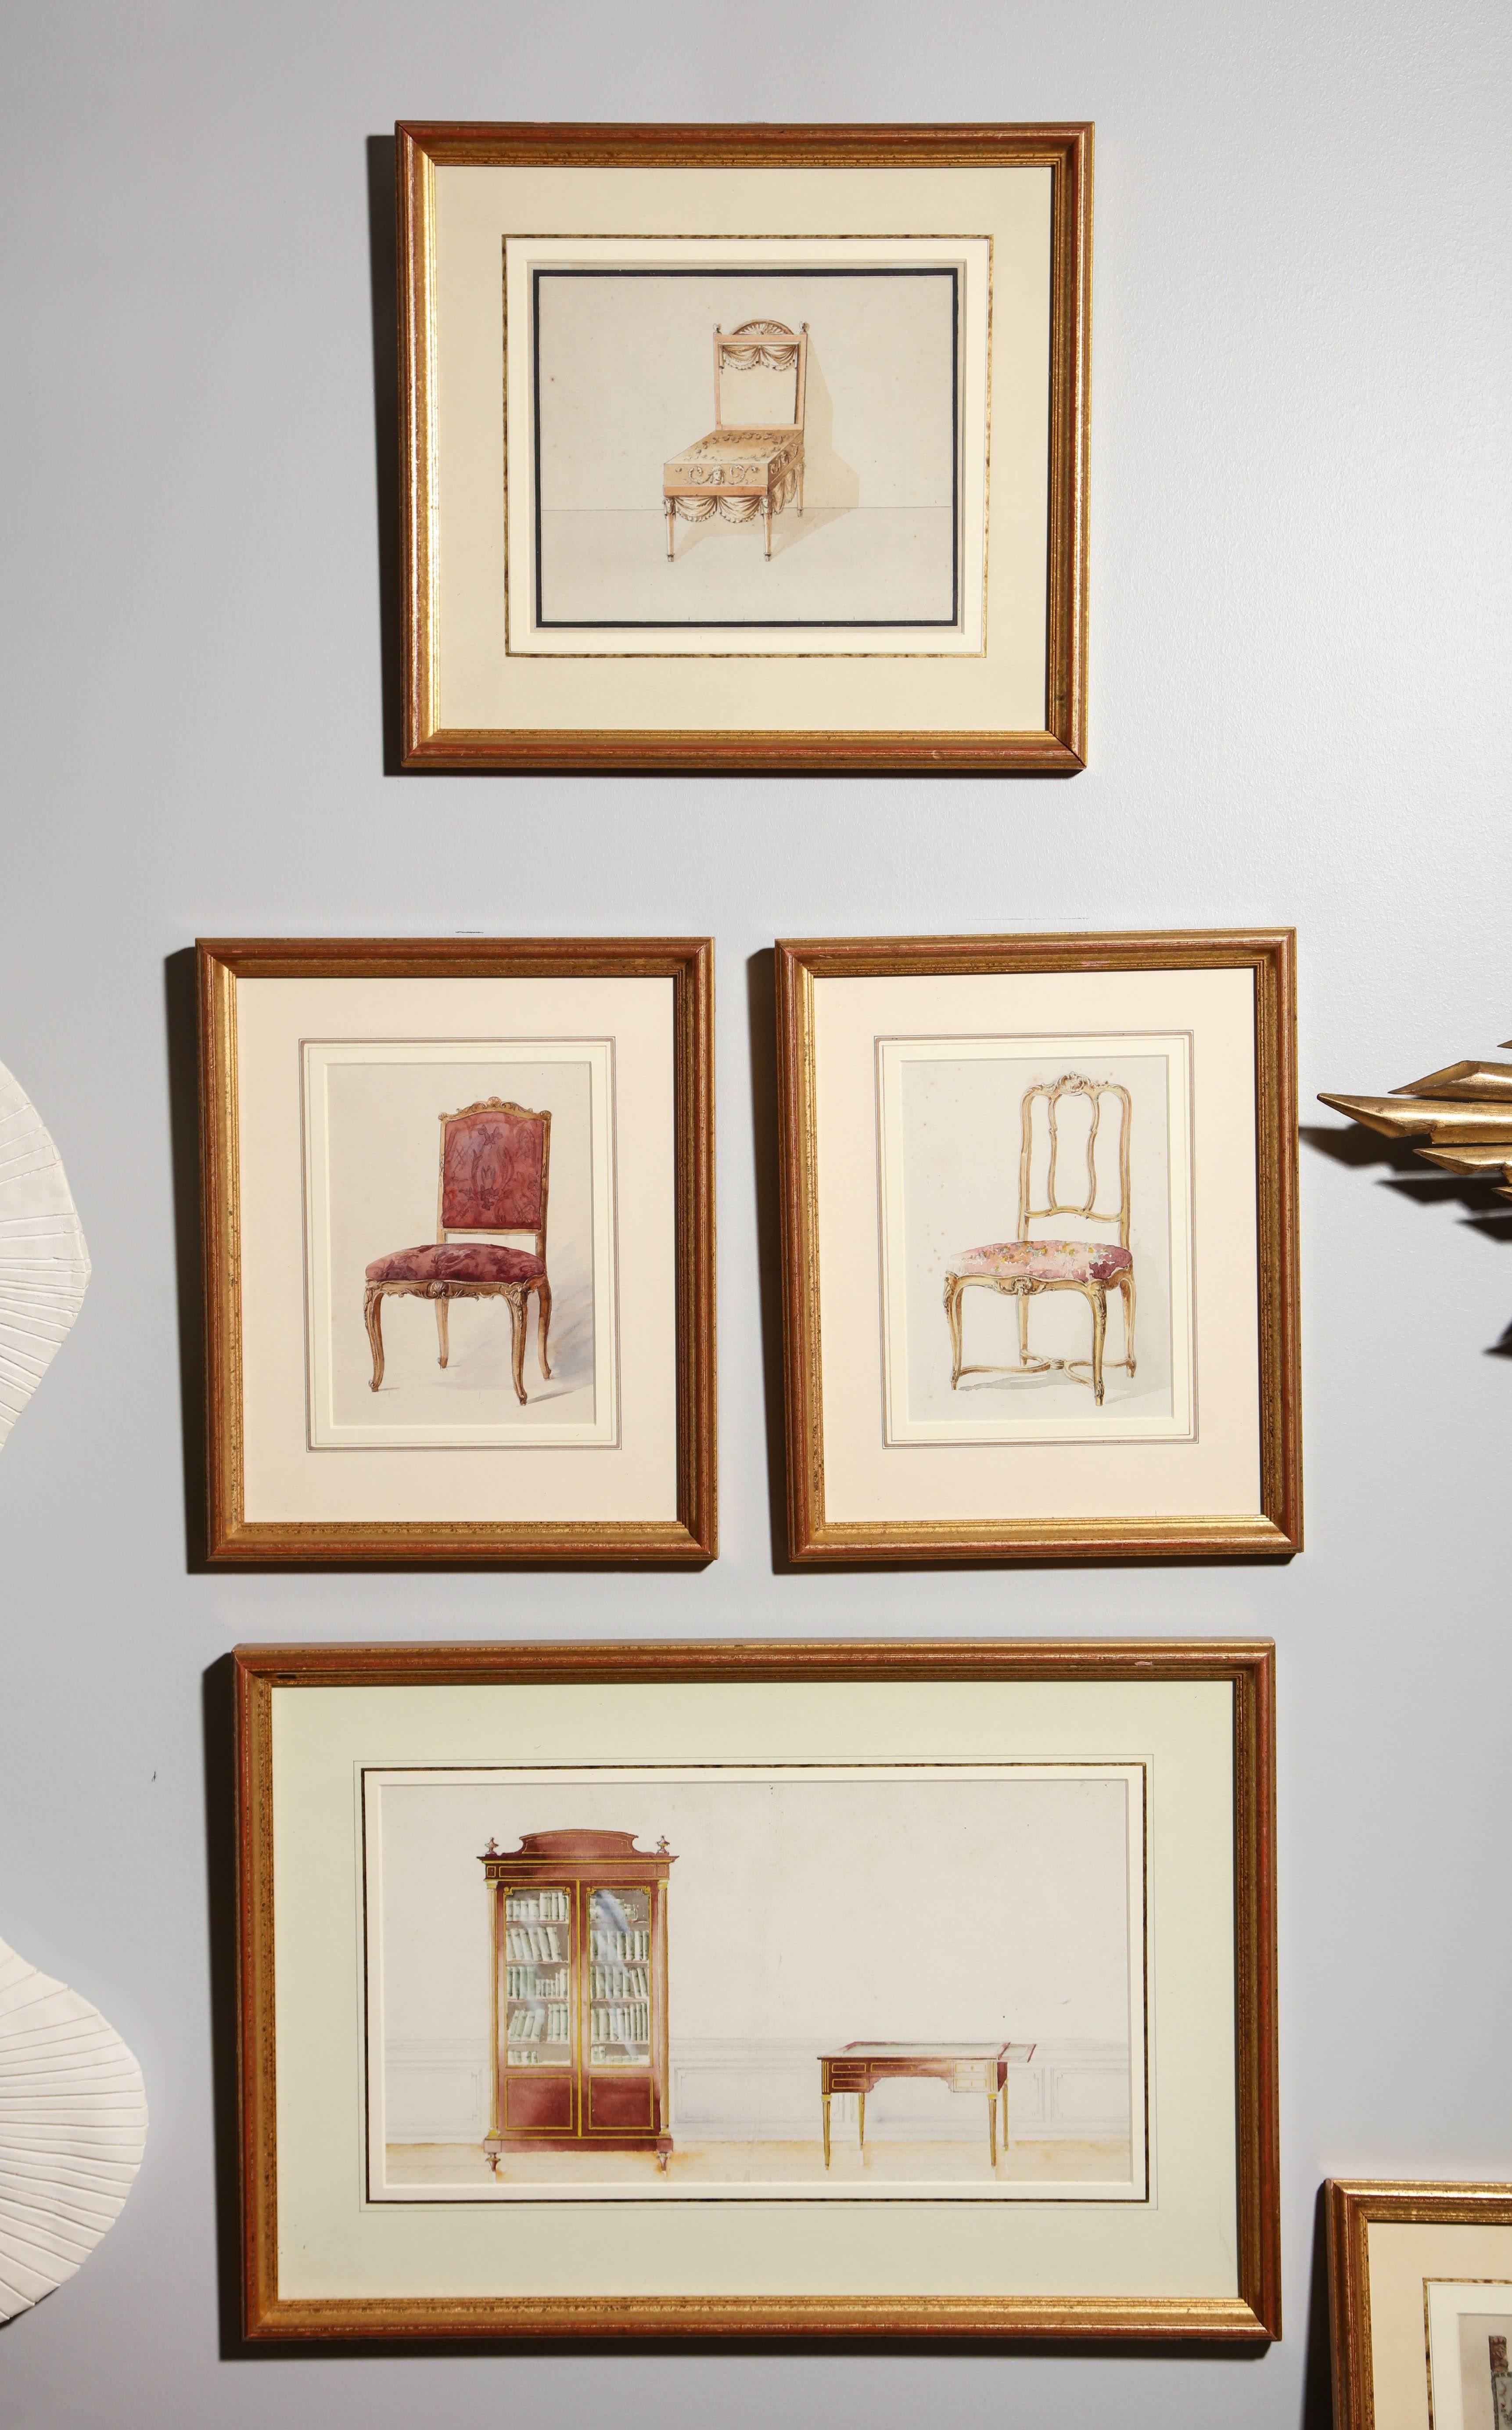 Series of Hand-Painted Drawings of Furniture 5